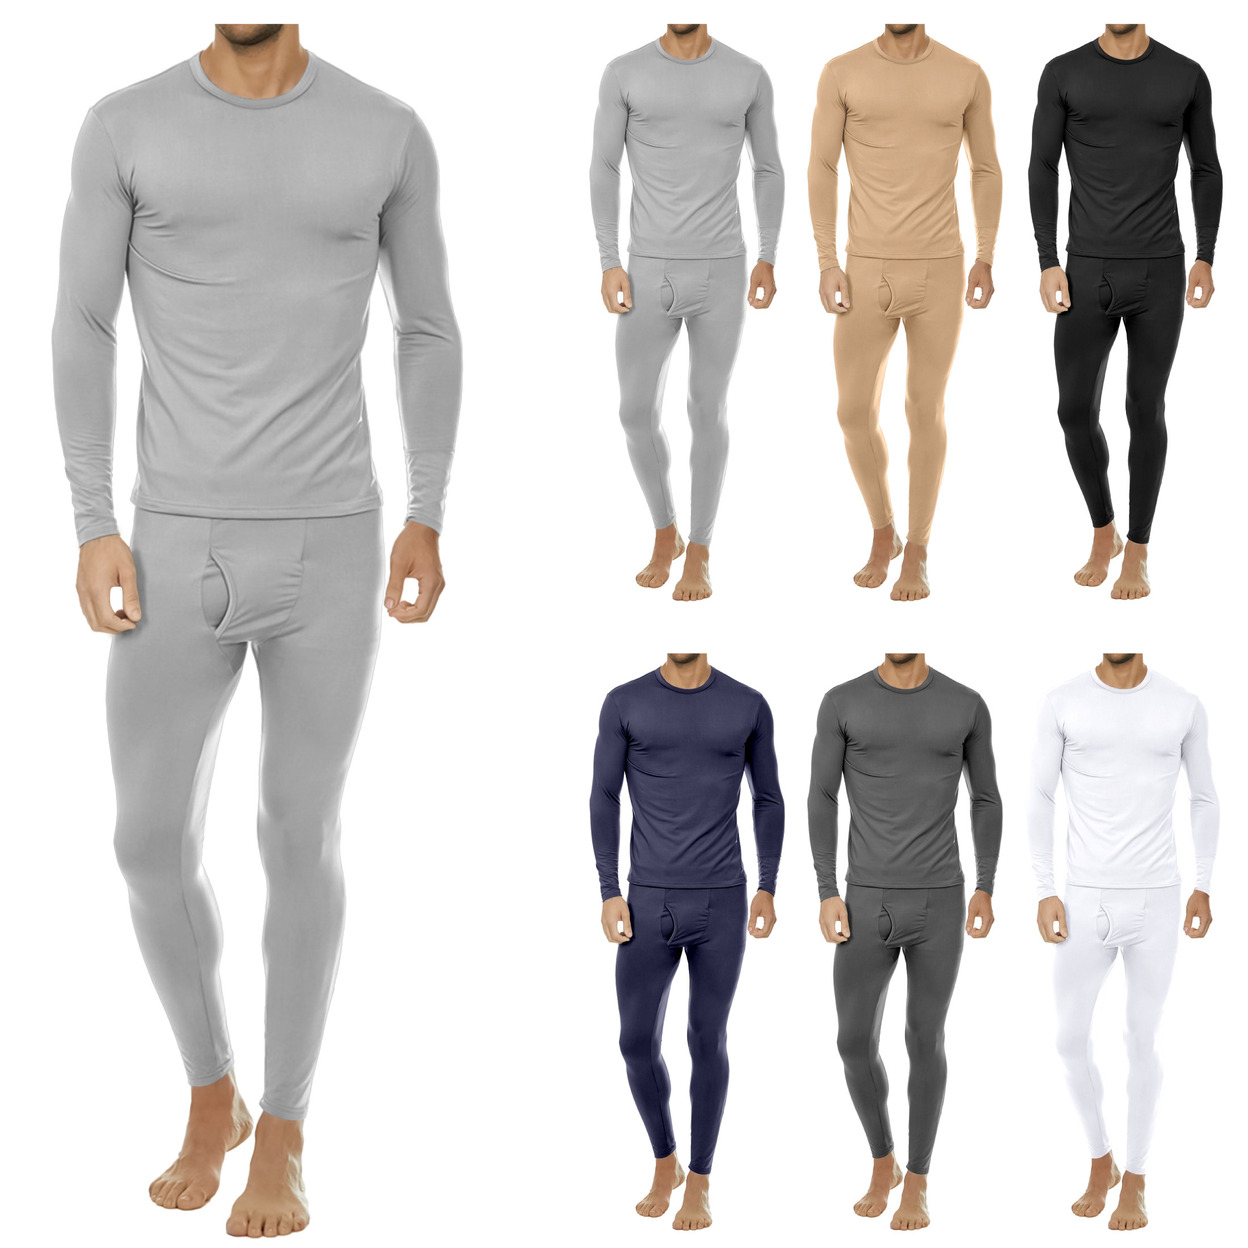 2-Sets: Men's Winter Warm Fleece Lined Thermal Underwear Set For Cold Weather - Grey&navy, Xx-large